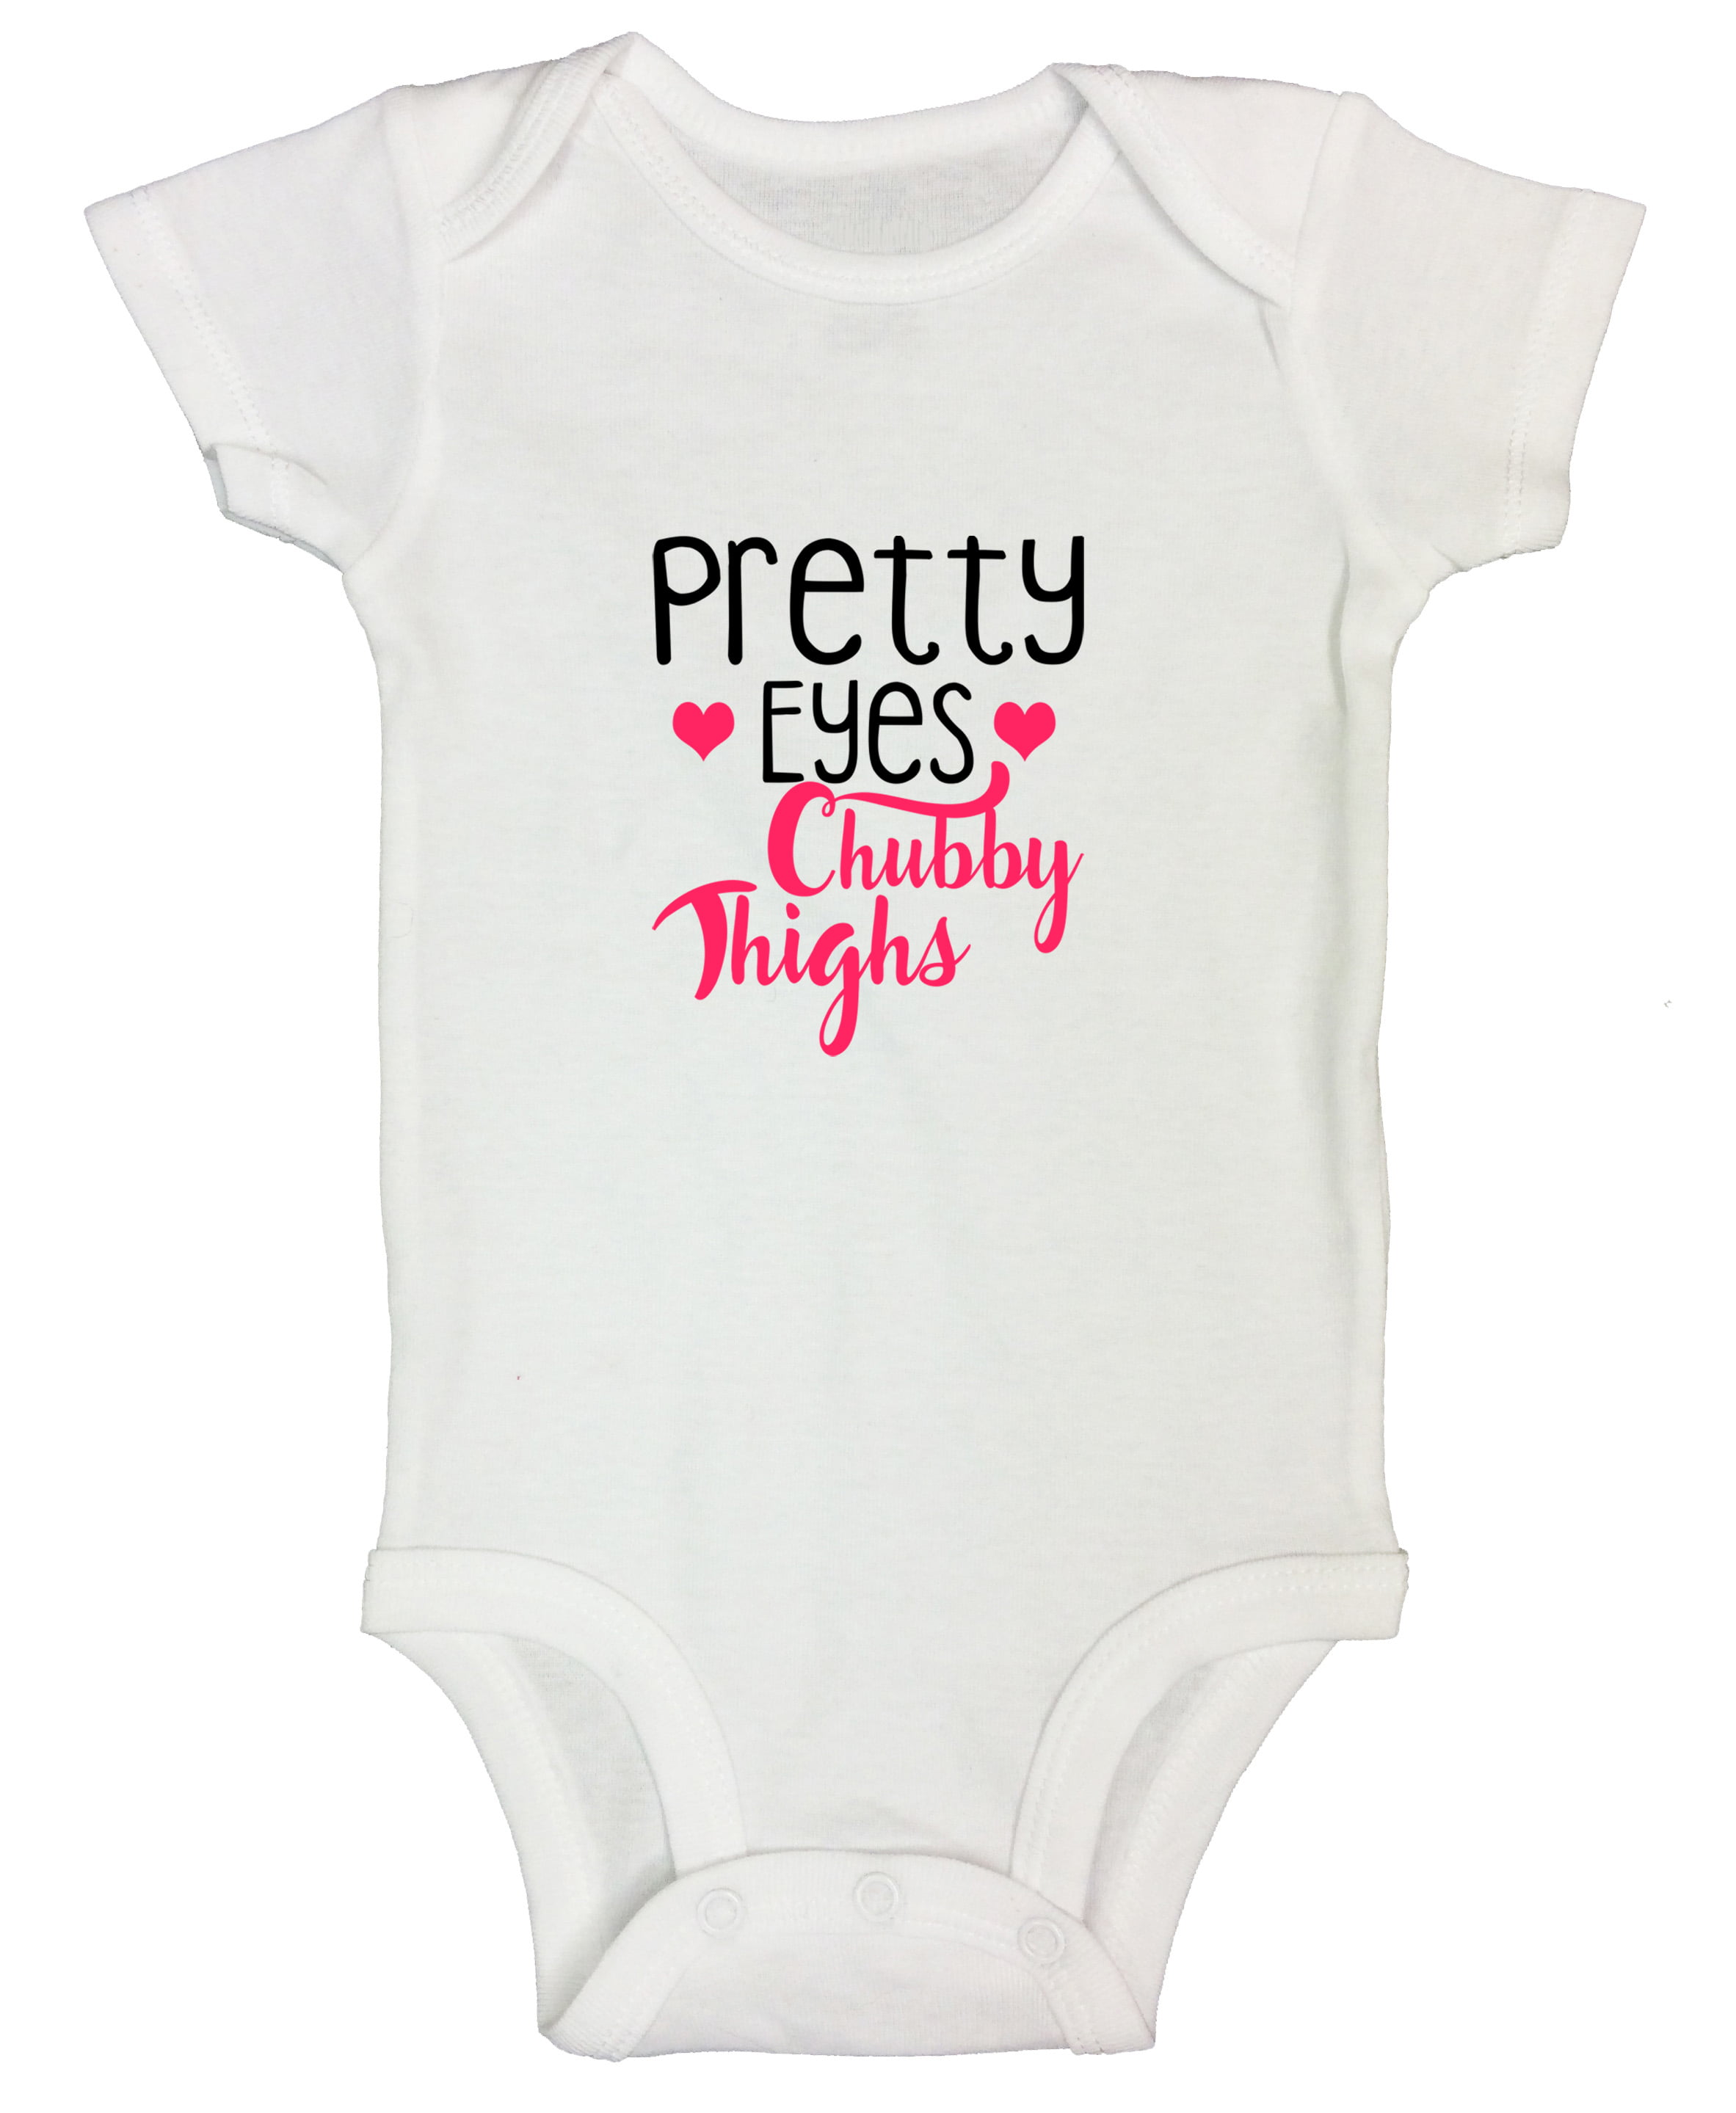 Pretty Eyes and Chubby Thighs Infant Bodysuit; Infant Creeper